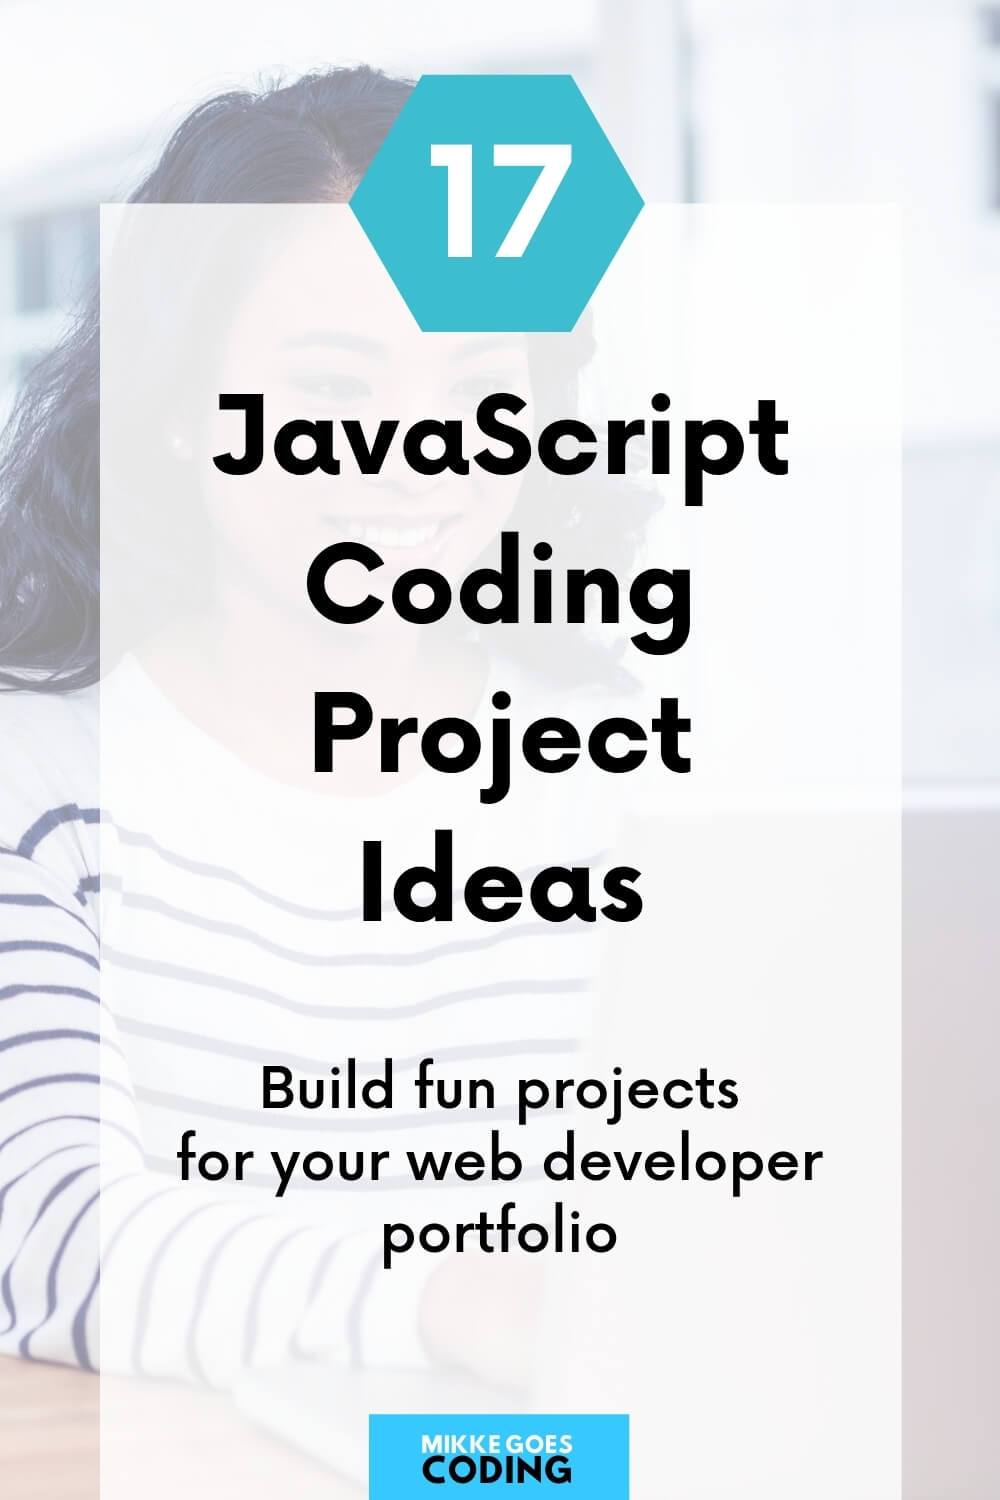 20 JavaScript Projects for Beginners For 2020 With Source Code